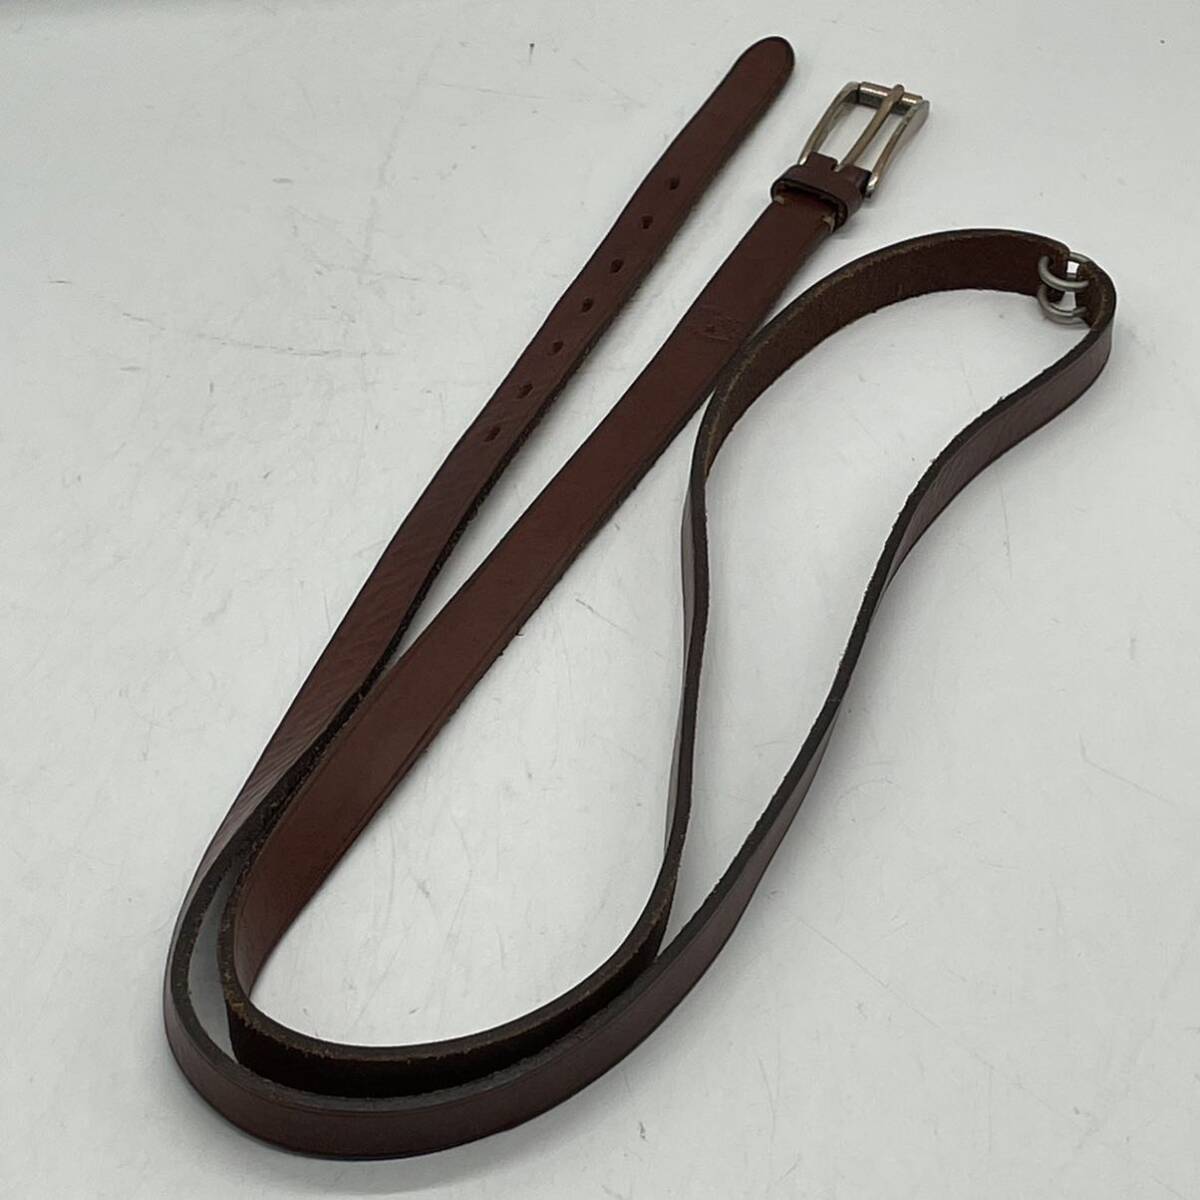 KO69*IL BISONTE Il Bisonte leather belt two -ply narrow belt total length 176.80 size degree Brown 